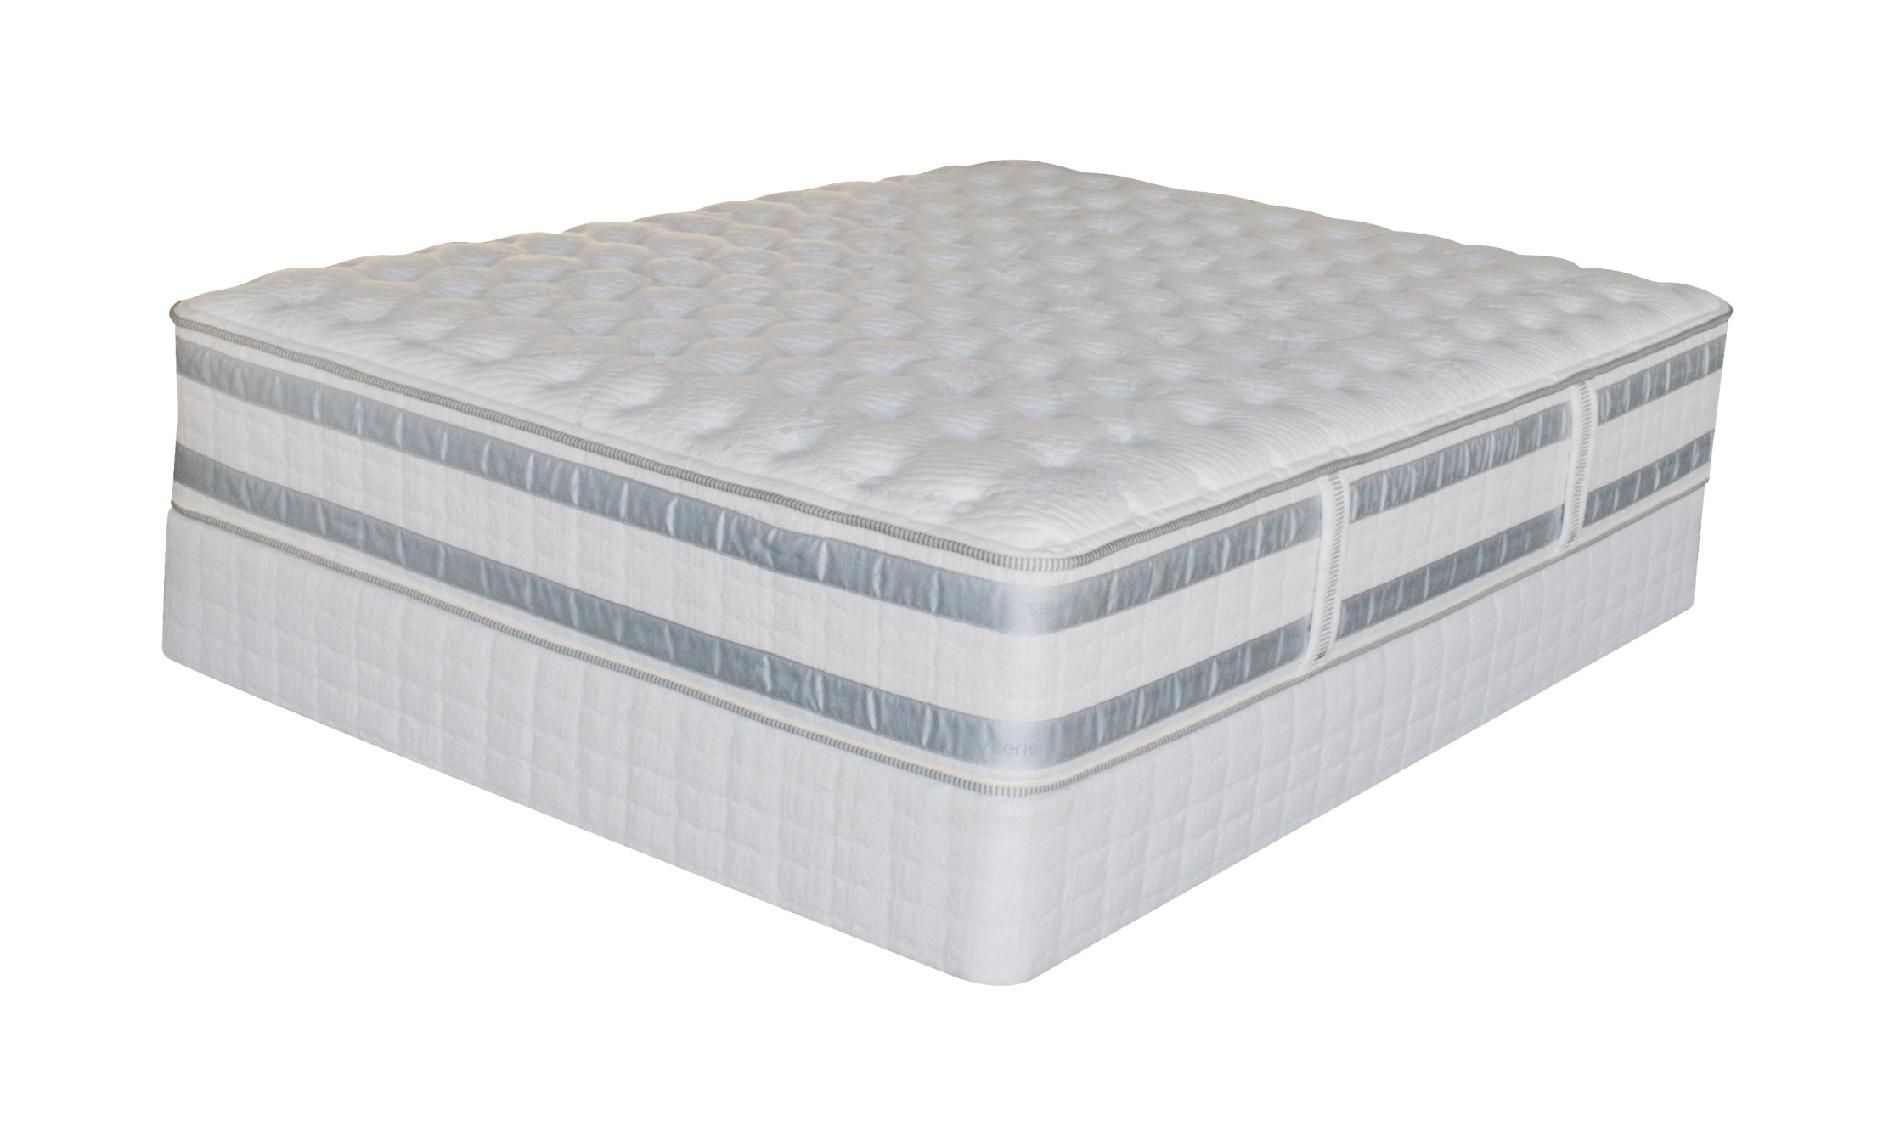 Serta CLOSEOUT WHILE SUPPLIES LAST - iSeries Careybrook II Eurotop King Mattress Only